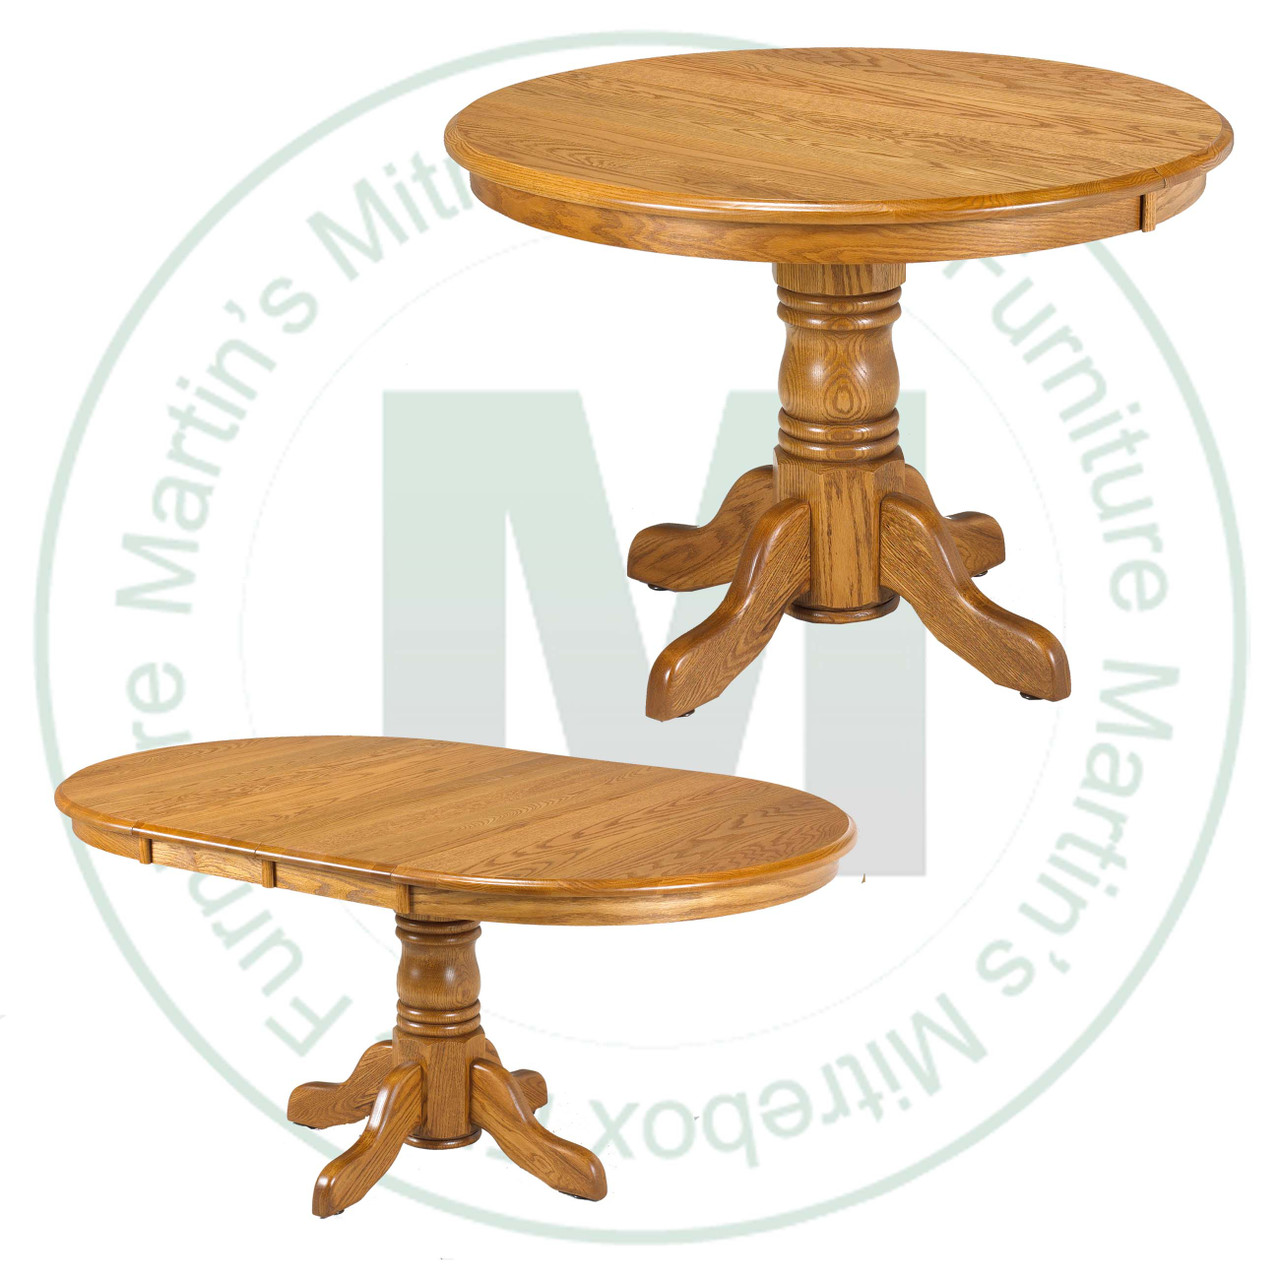 Wormy Maple Lancaster Collection Single Pedestal Table 36''D x 36''W x 30''H With 2 - 12'' Leaves. Table Has 1.25'' Thick Top